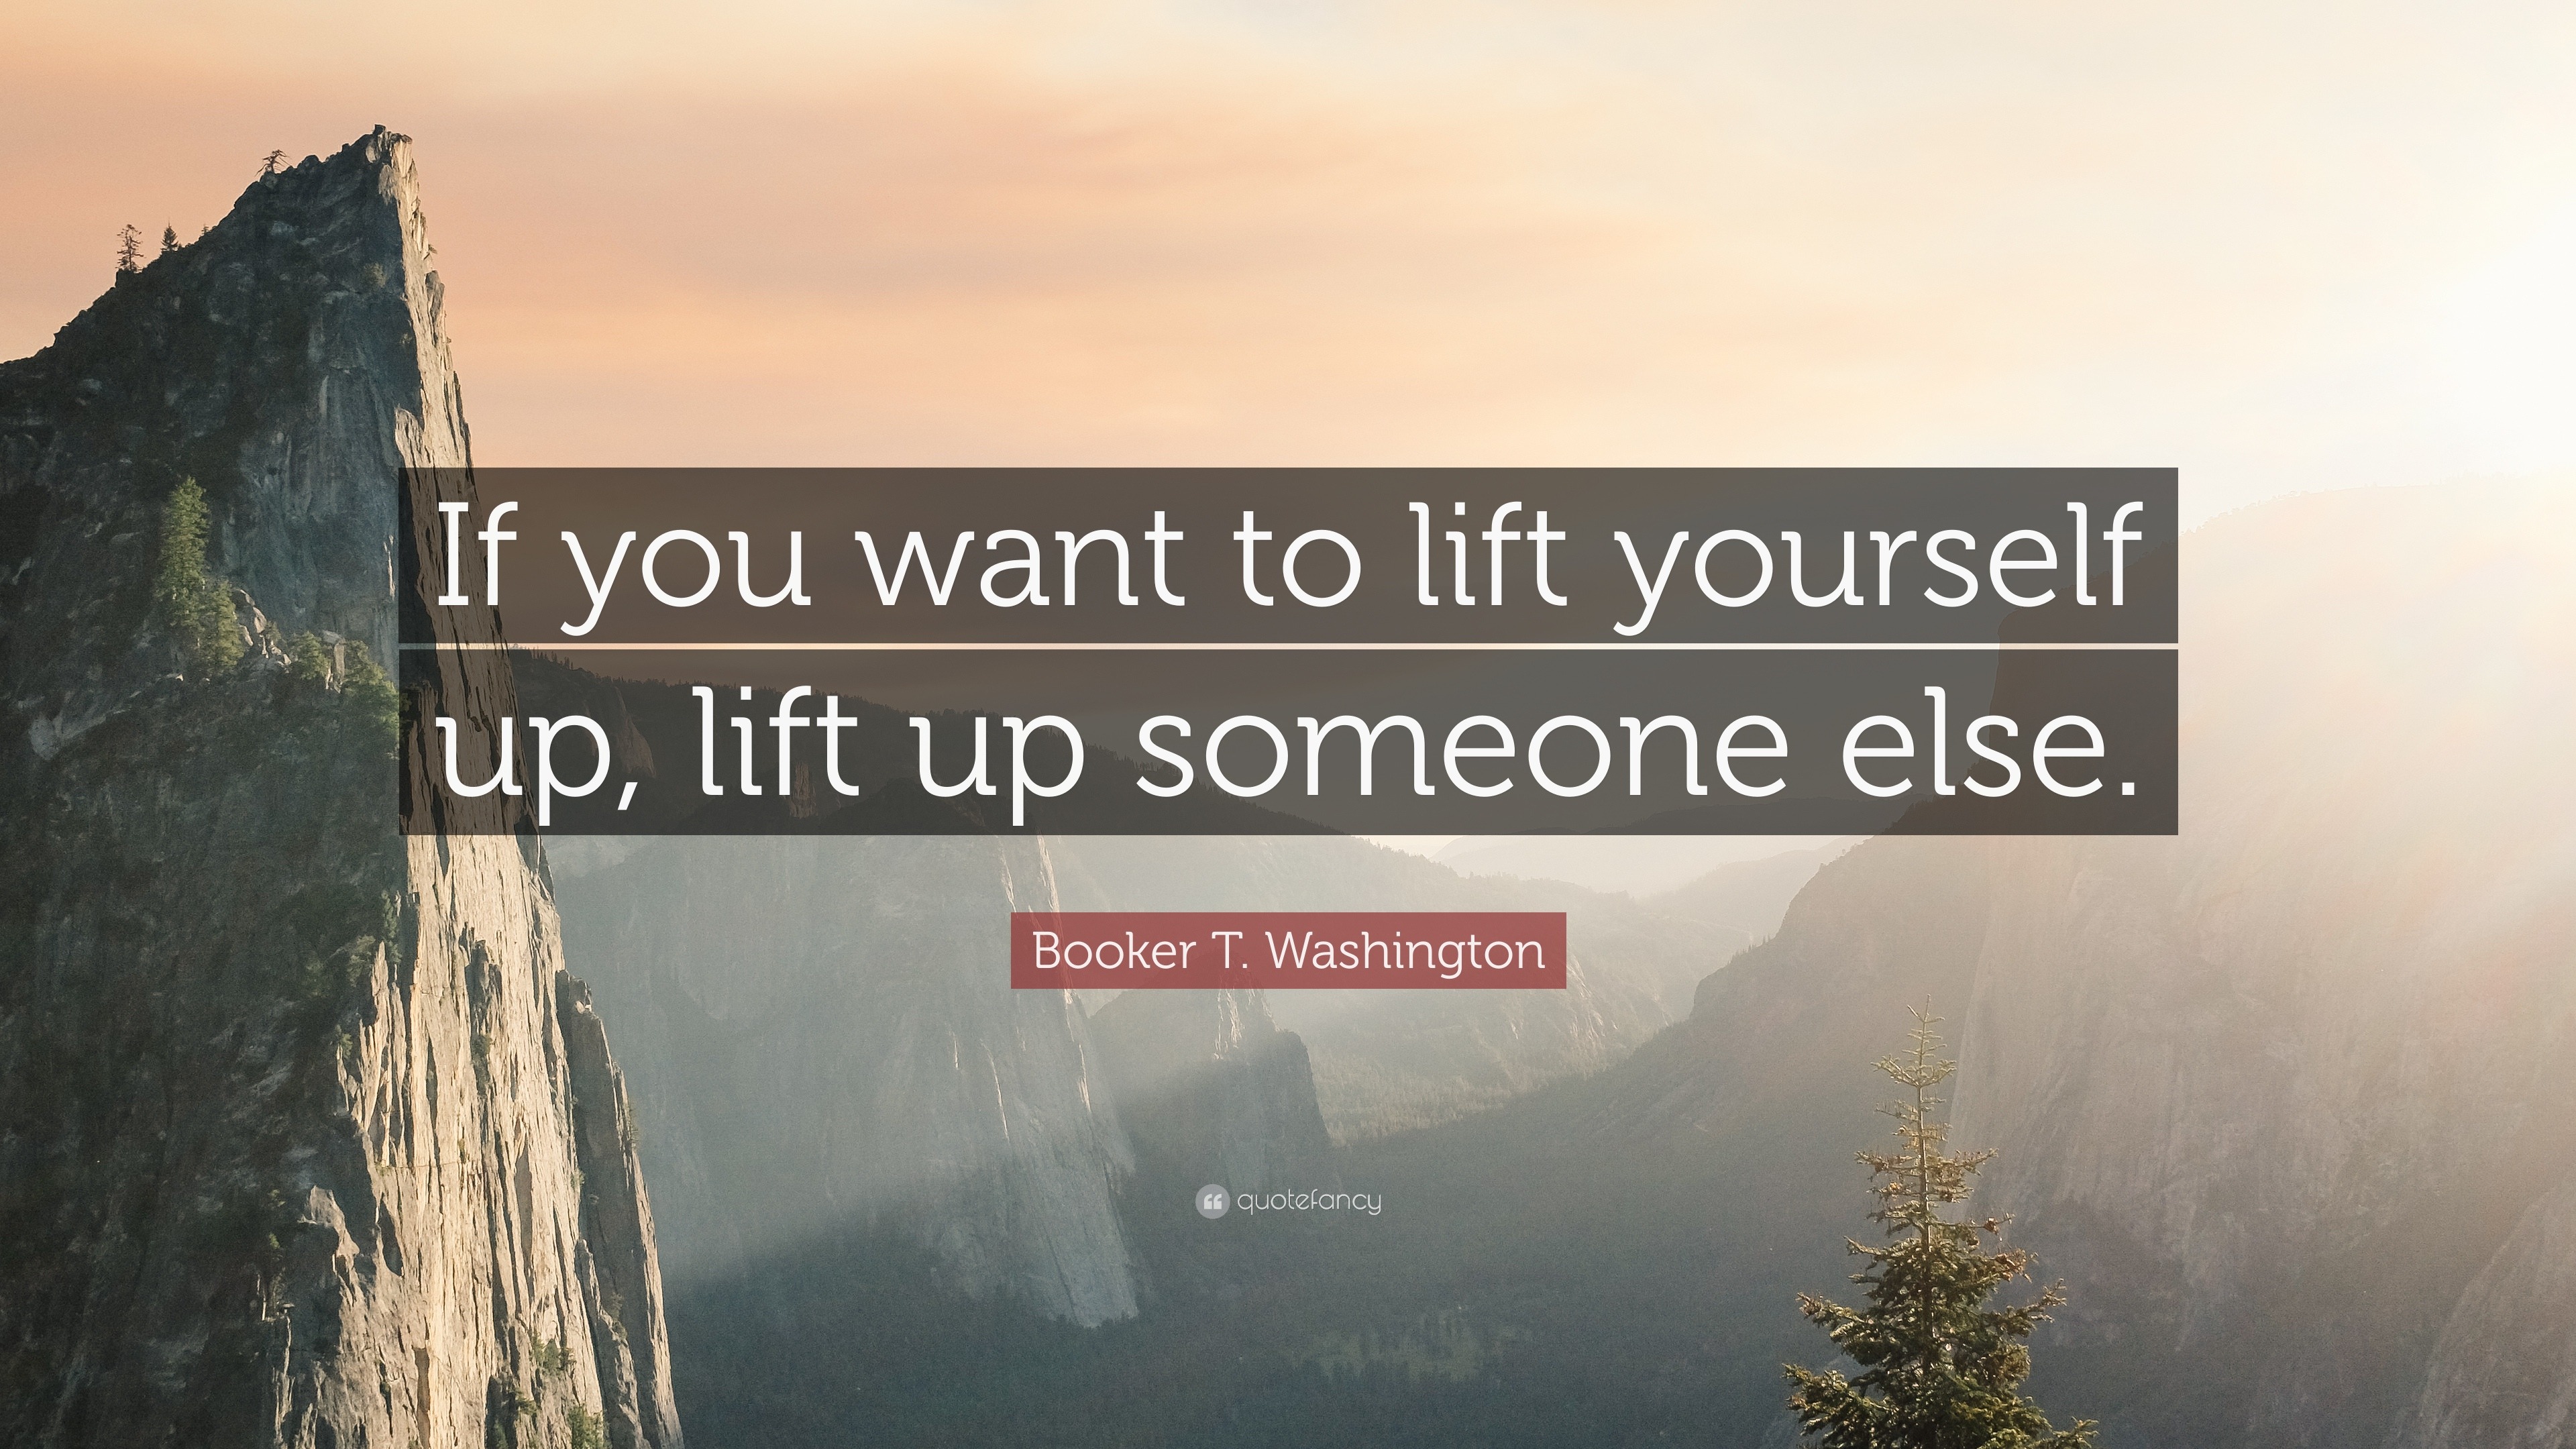 If you want to lift yourself up, lift up someone else. Booker T